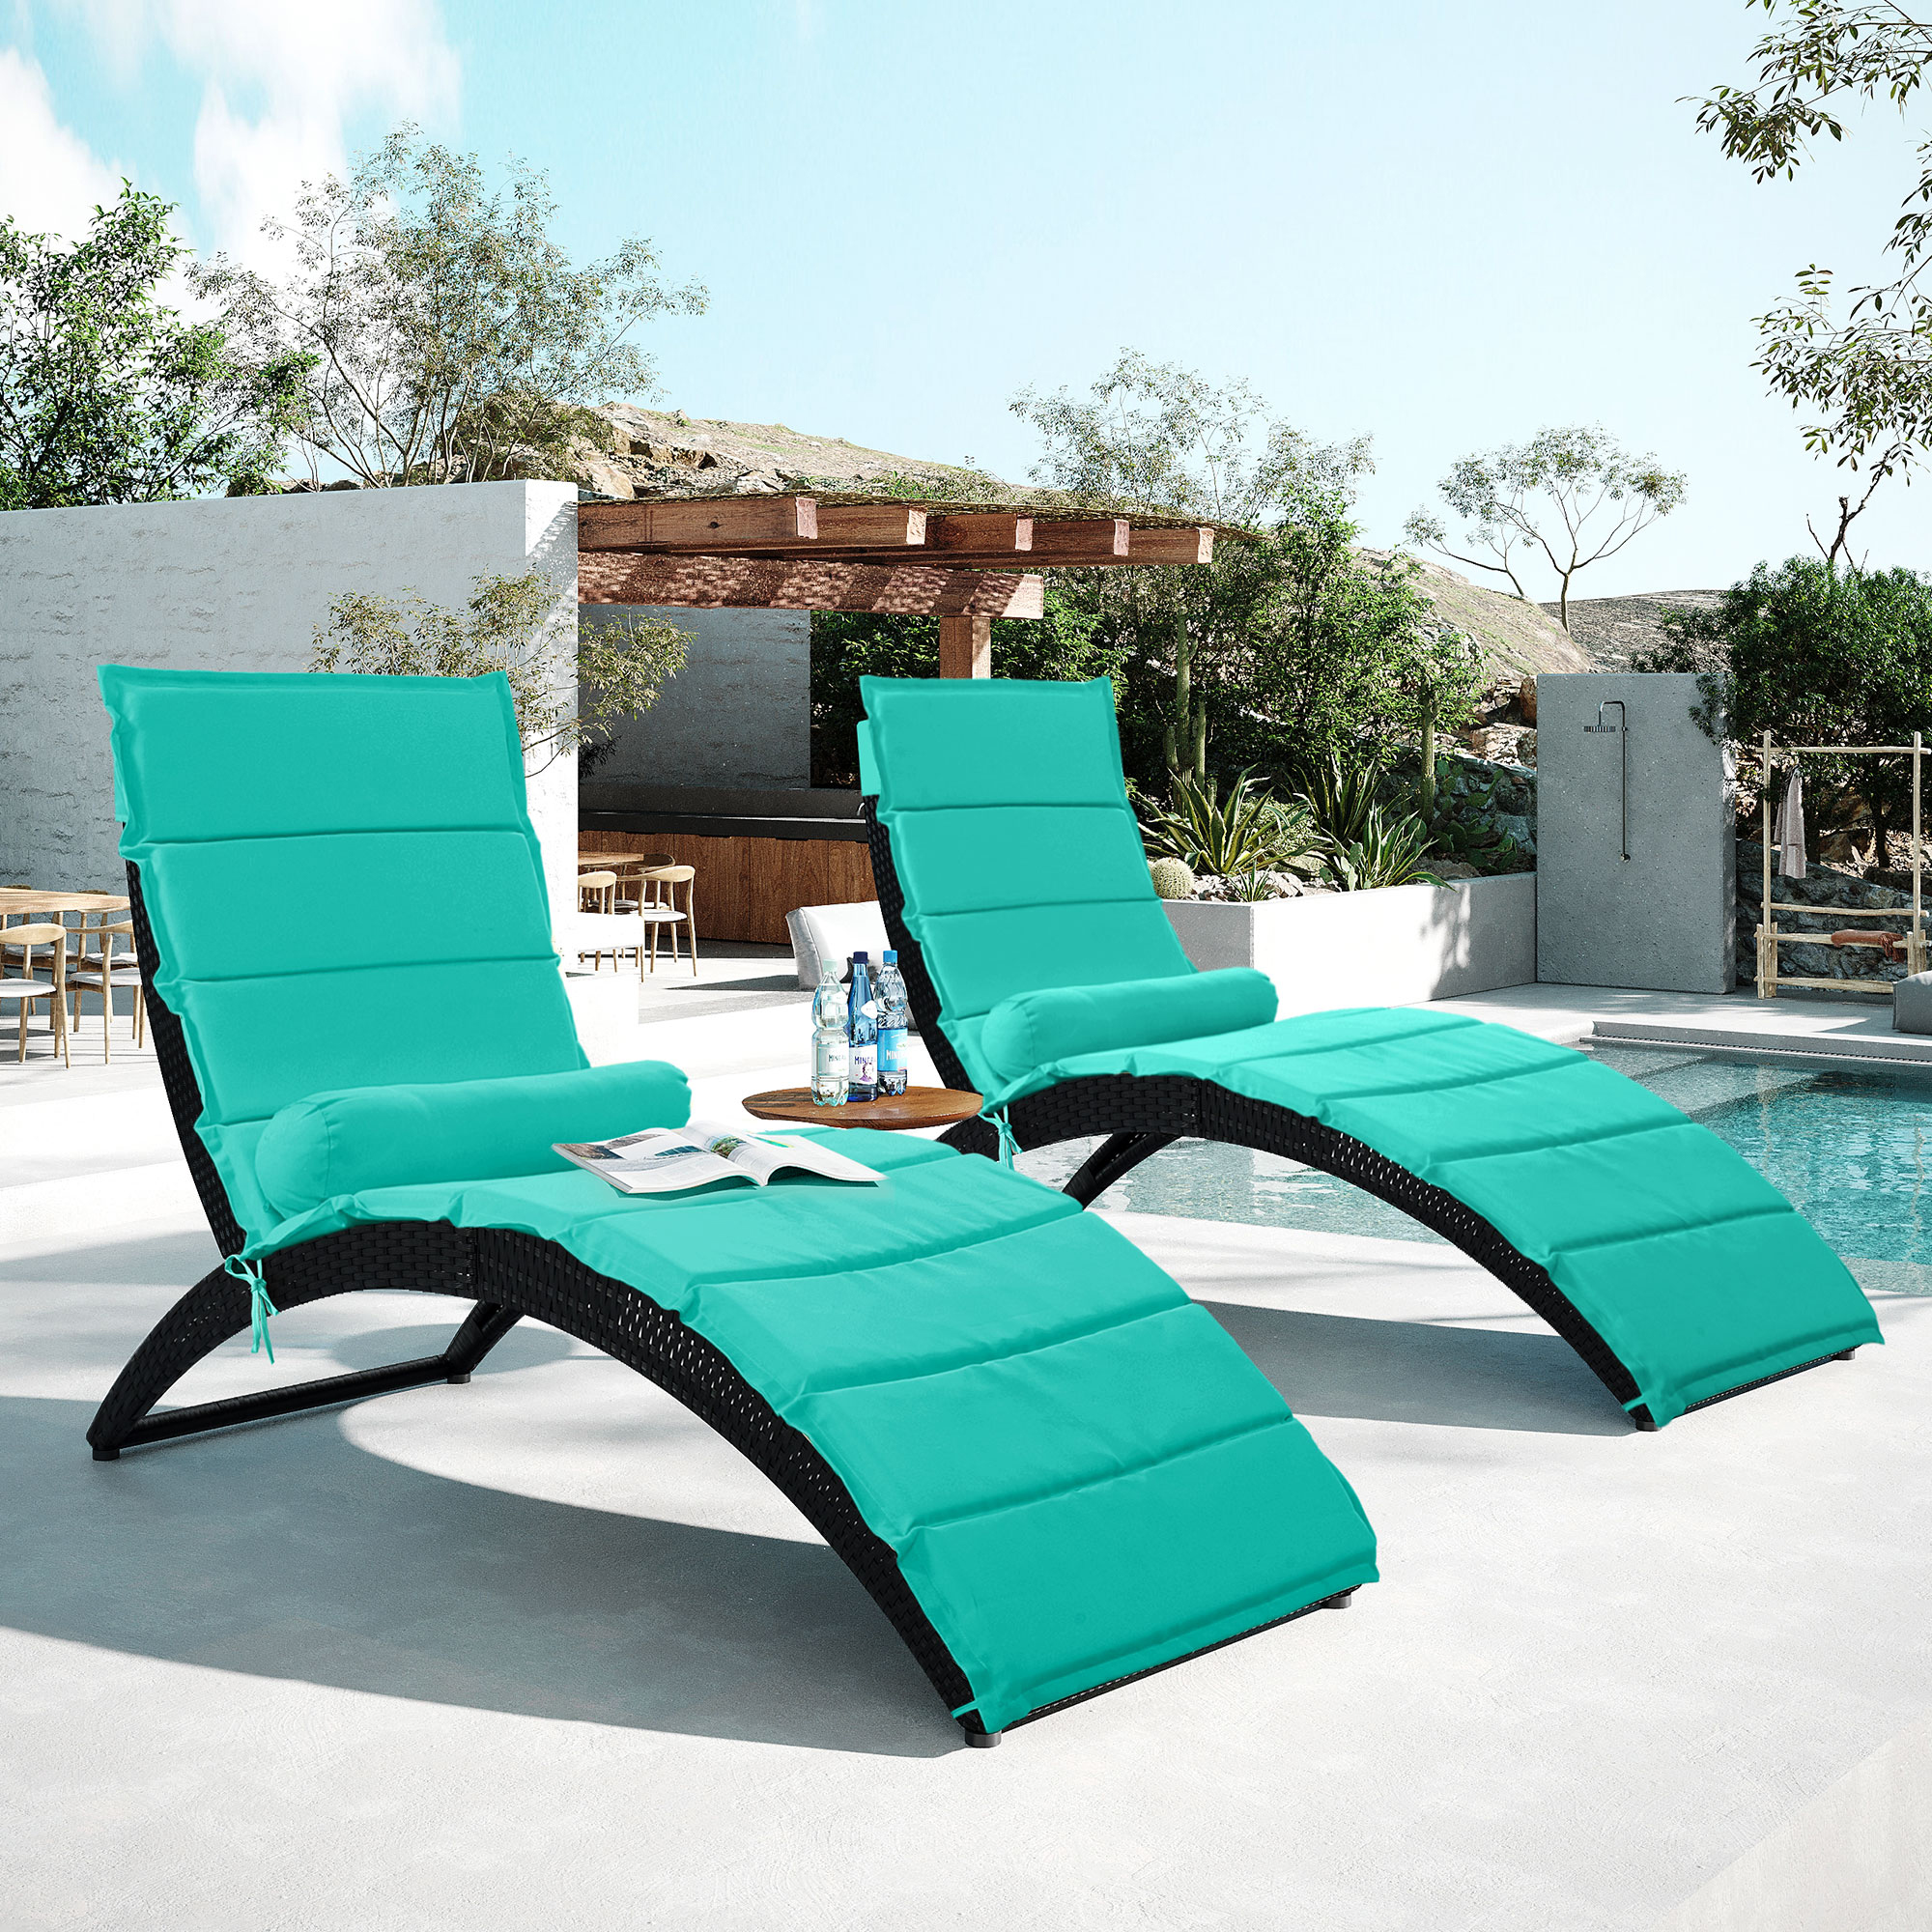 Chaise Lounge Set of 2, Outdoor Lounge Chairs, Chaise Lounge Chairs, Patio Reclining Chair Furniture for Poolside, Deck, Backyard, JA2925 - image 1 of 10